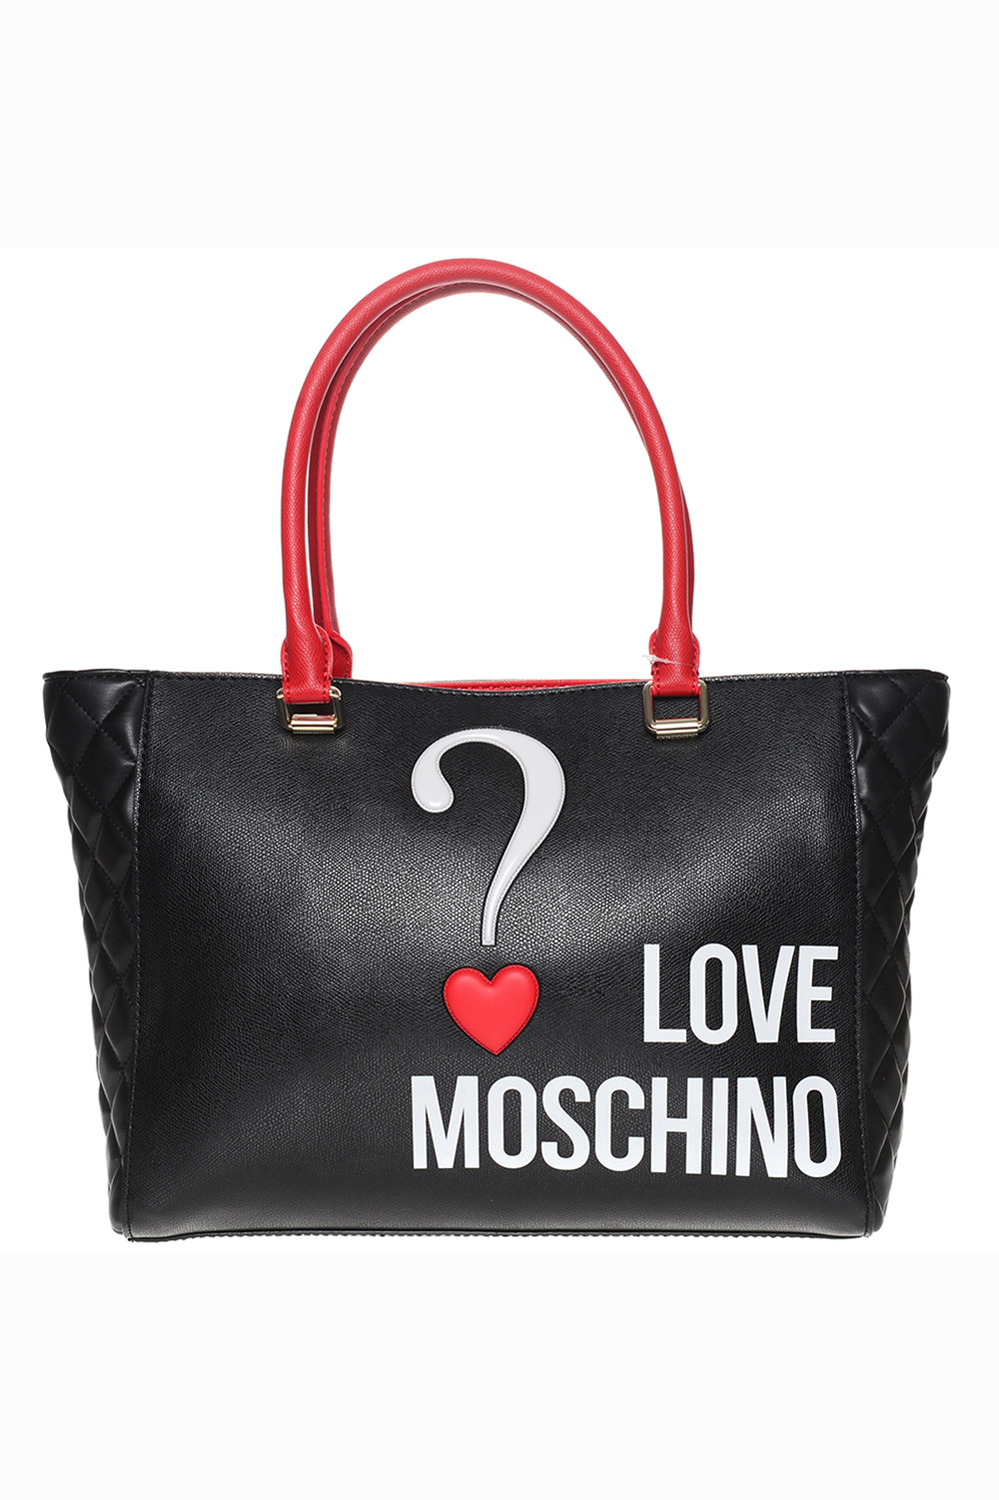 Love Moschino Bag - Limited edition | Discount Designer Stock